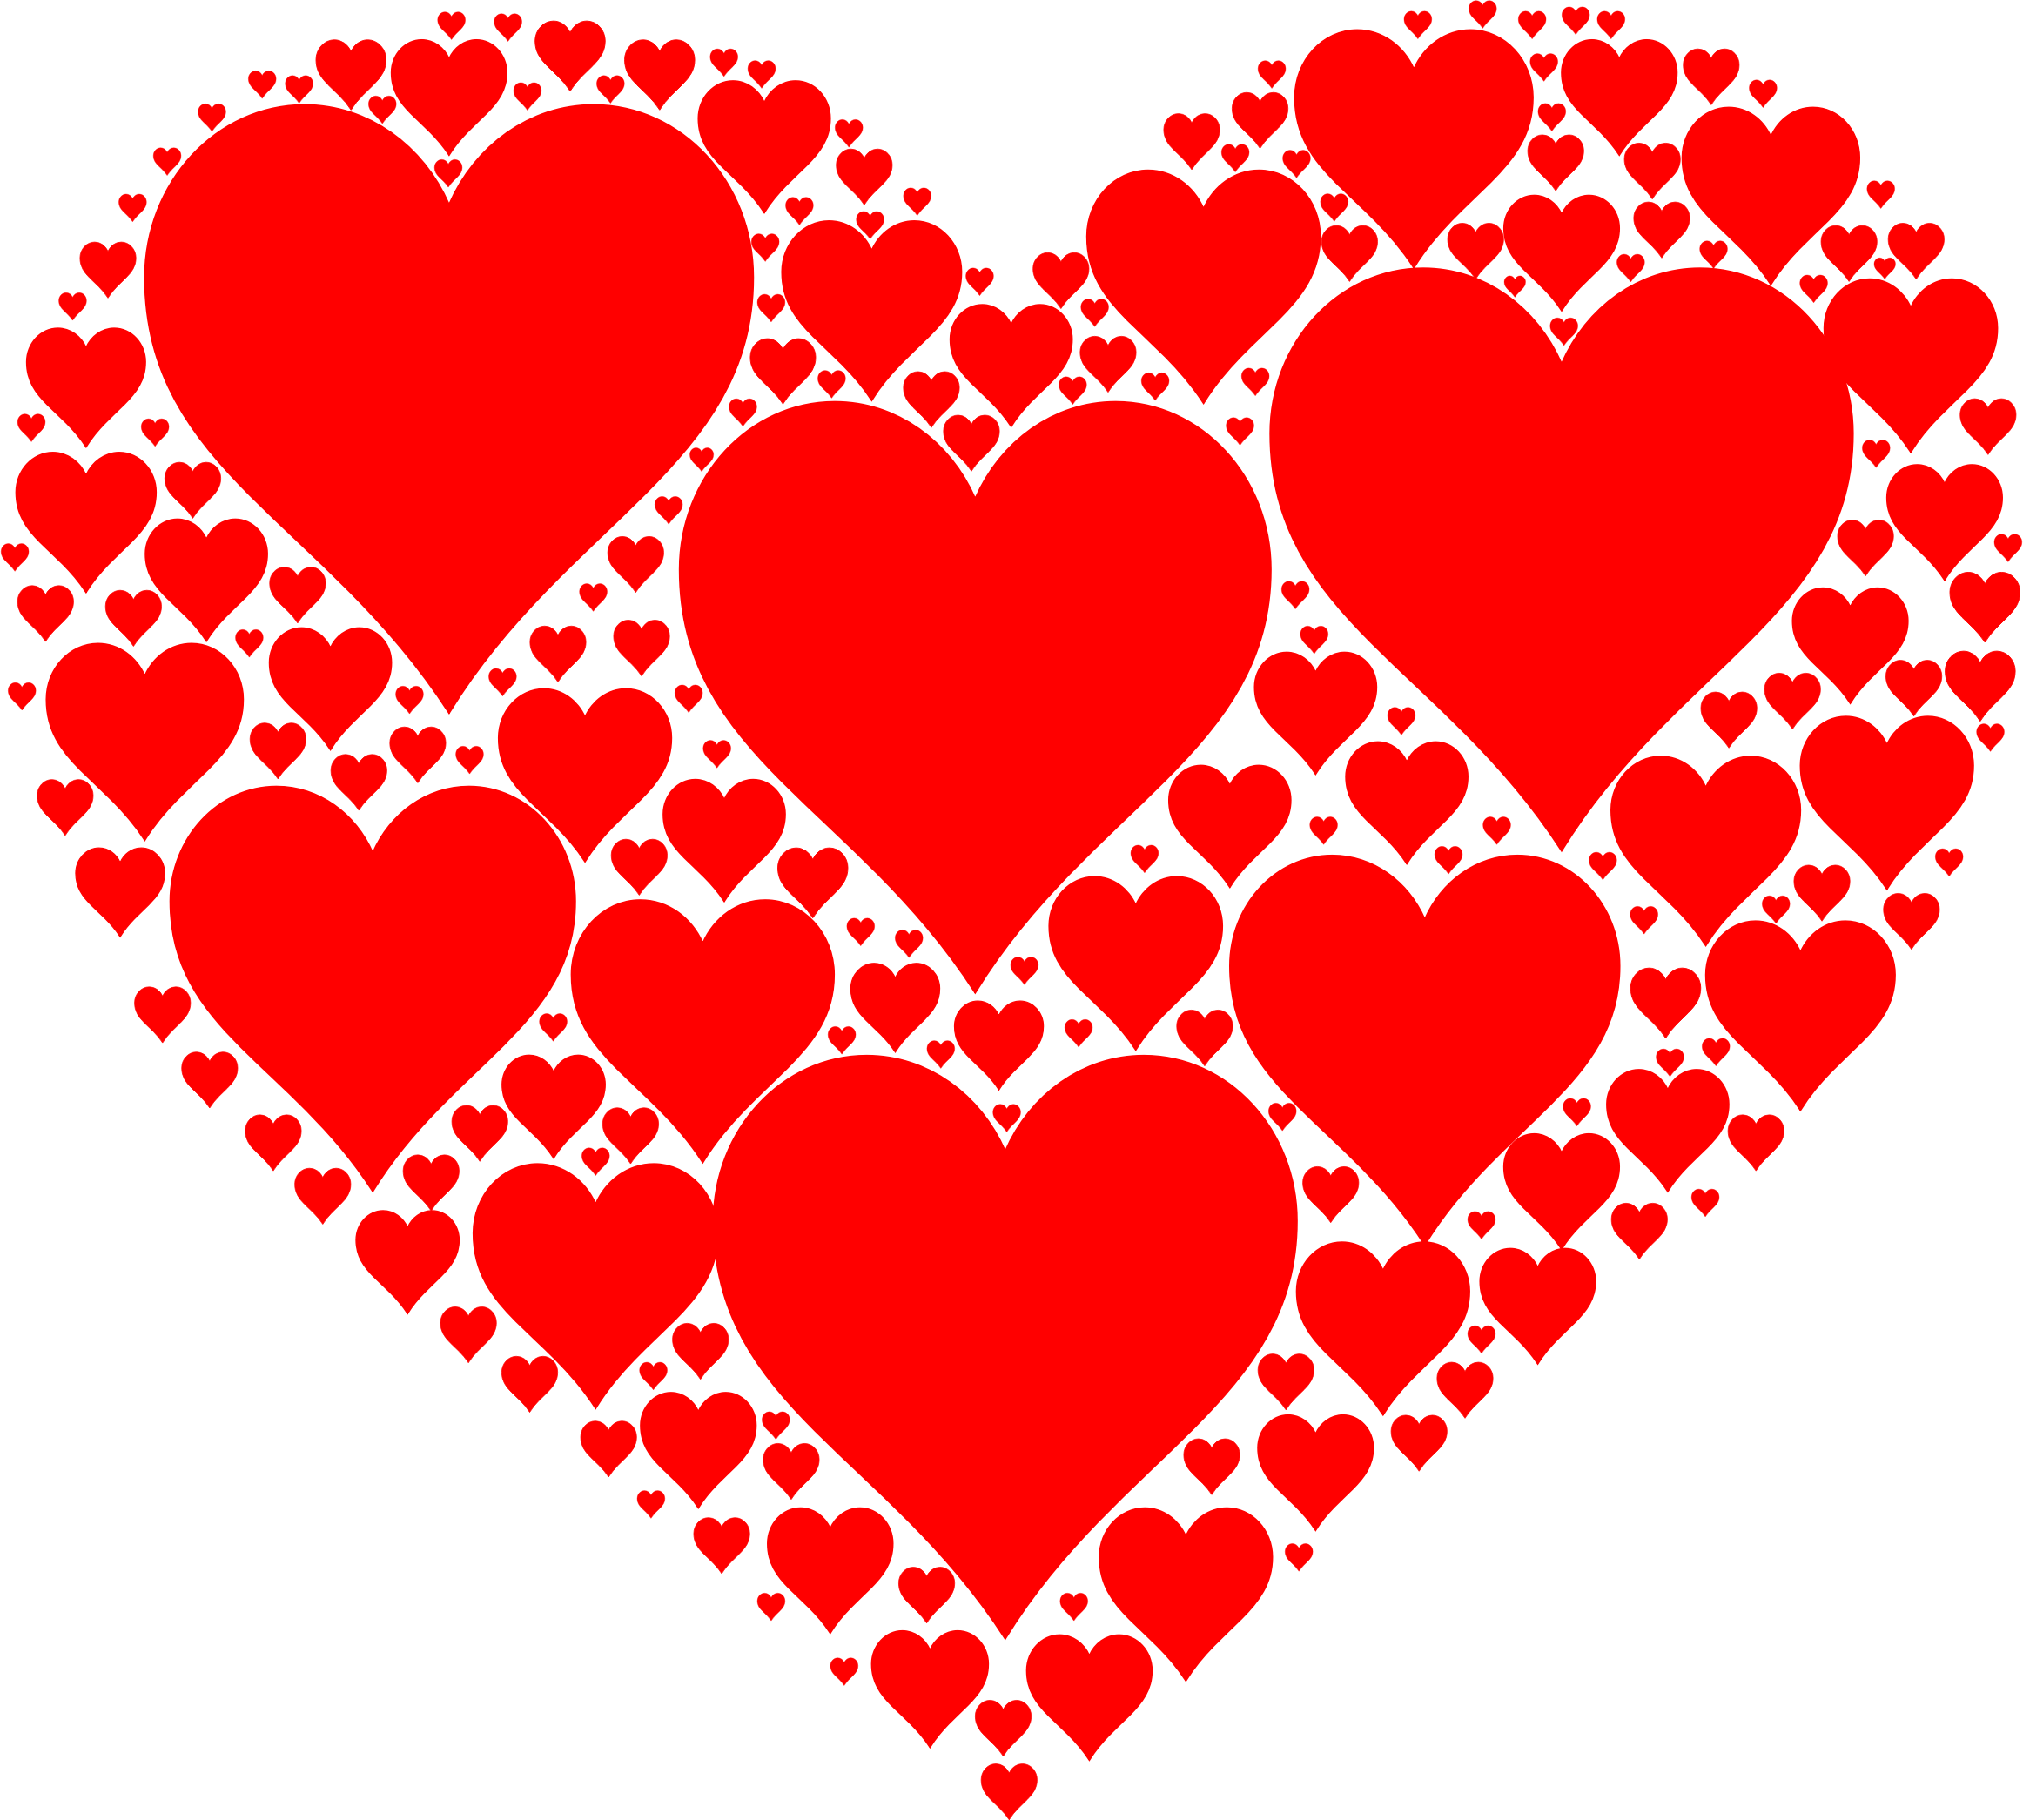  Heart  in Heart  Vector Files image  Free  stock photo 